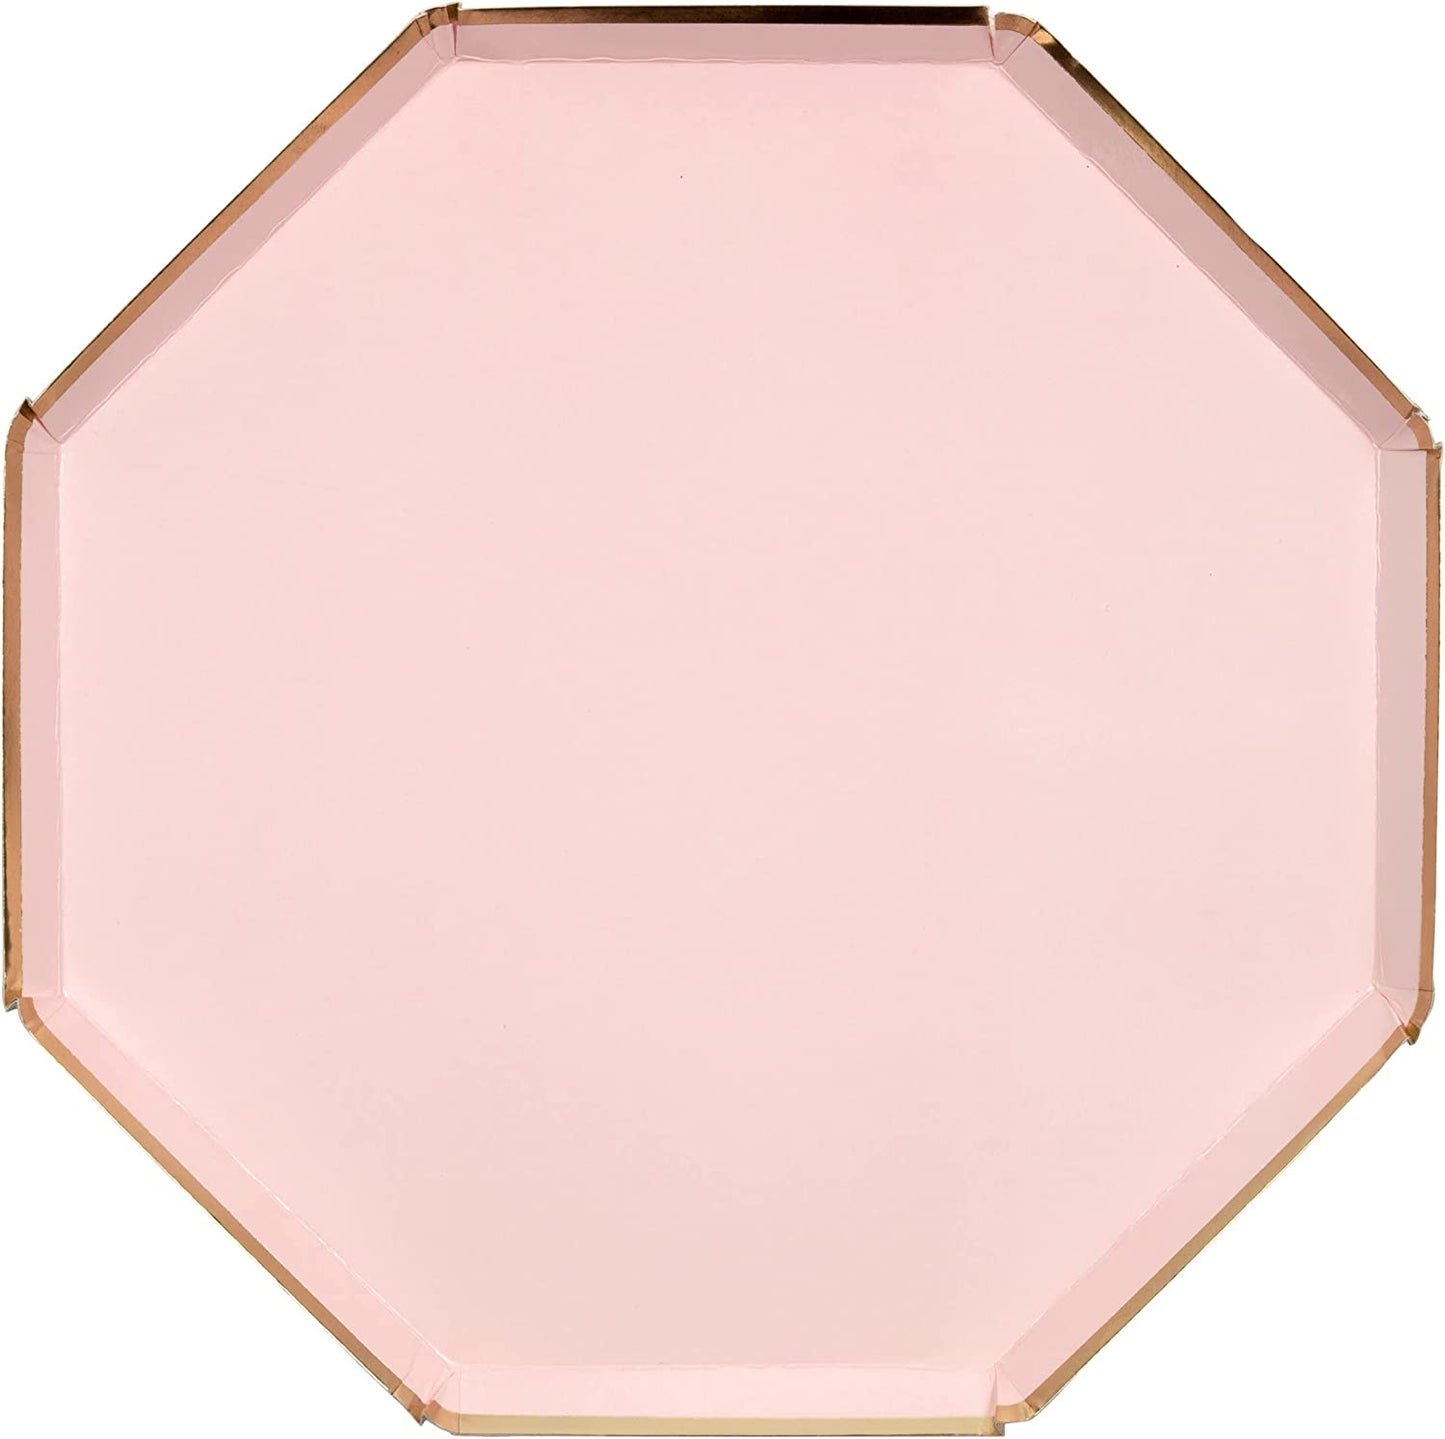 Dusty Pink Large Octagonal Plate